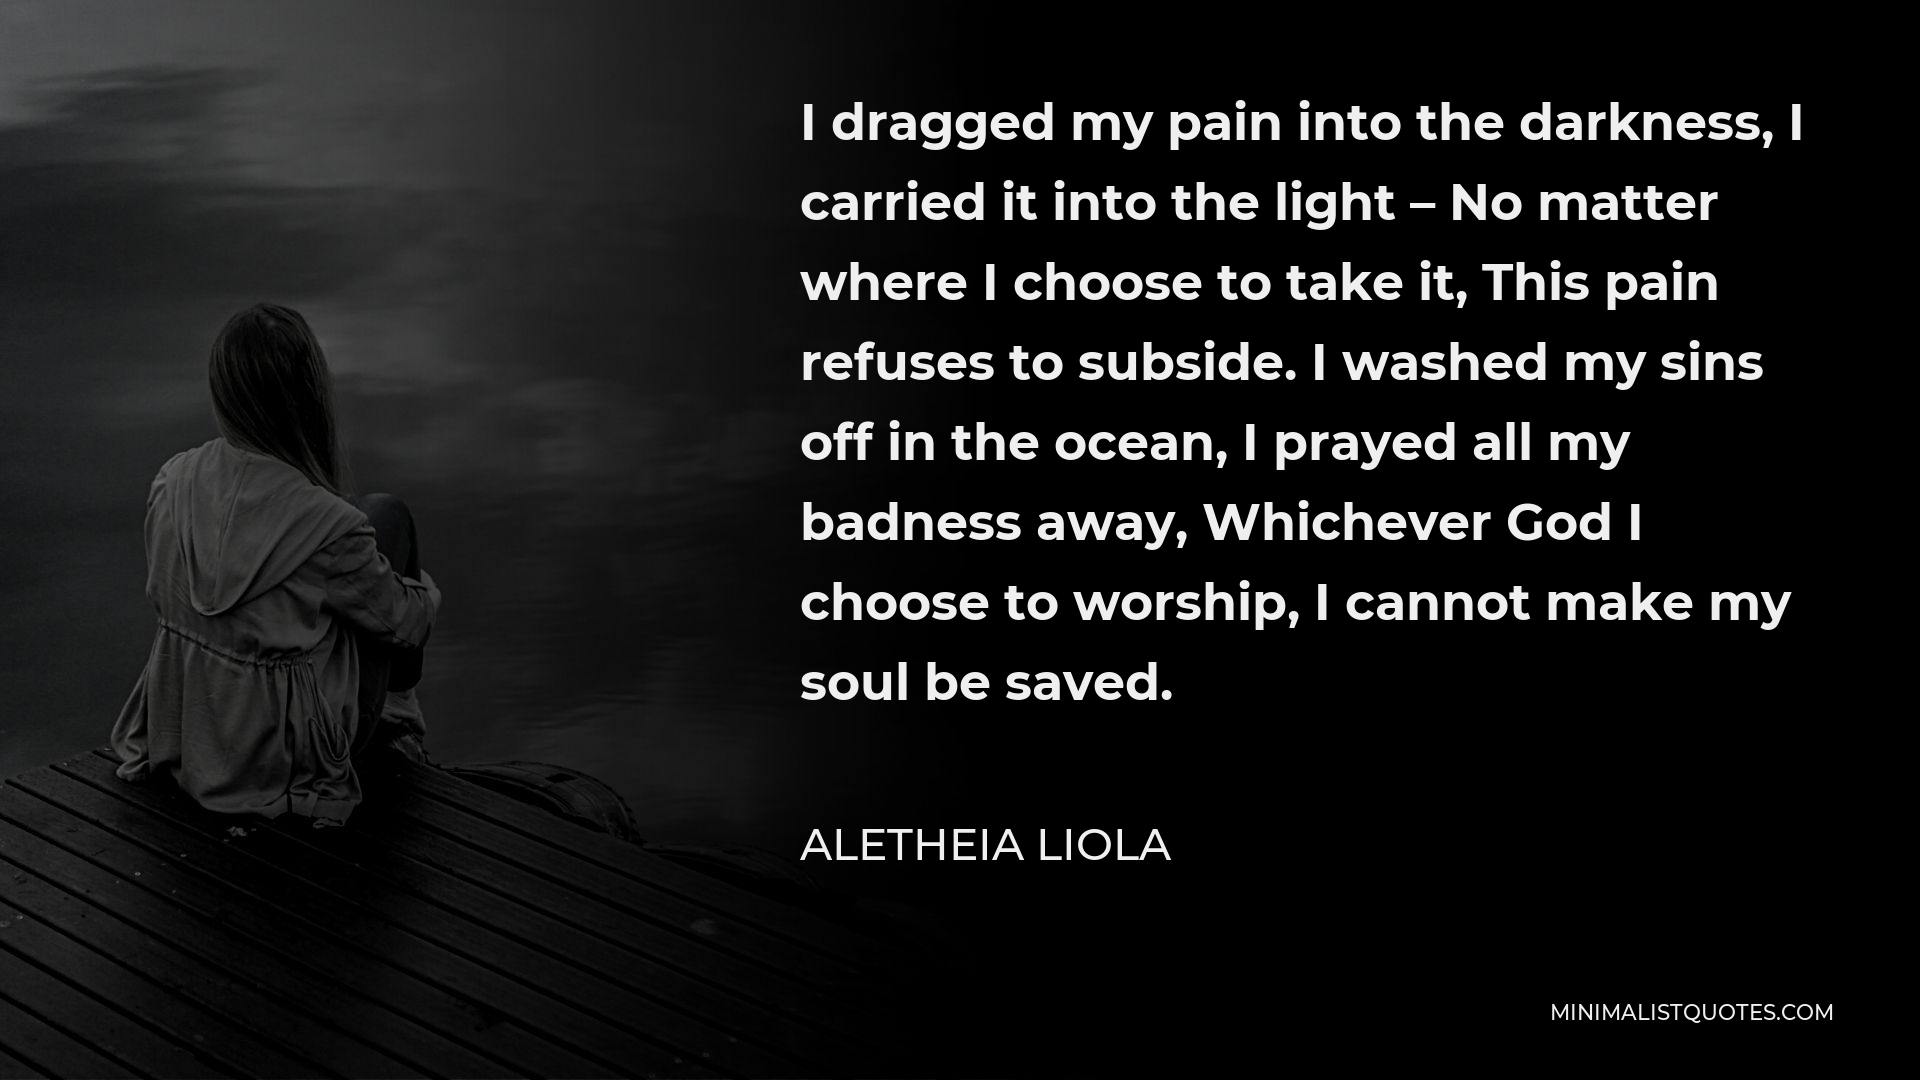 Aletheia Liola Quote - I dragged my pain into the darkness, I carried it into the light – No matter where I choose to take it, This pain refuses to subside. I washed my sins off in the ocean, I prayed all my badness away, Whichever God I choose to worship, I cannot make my soul be saved.